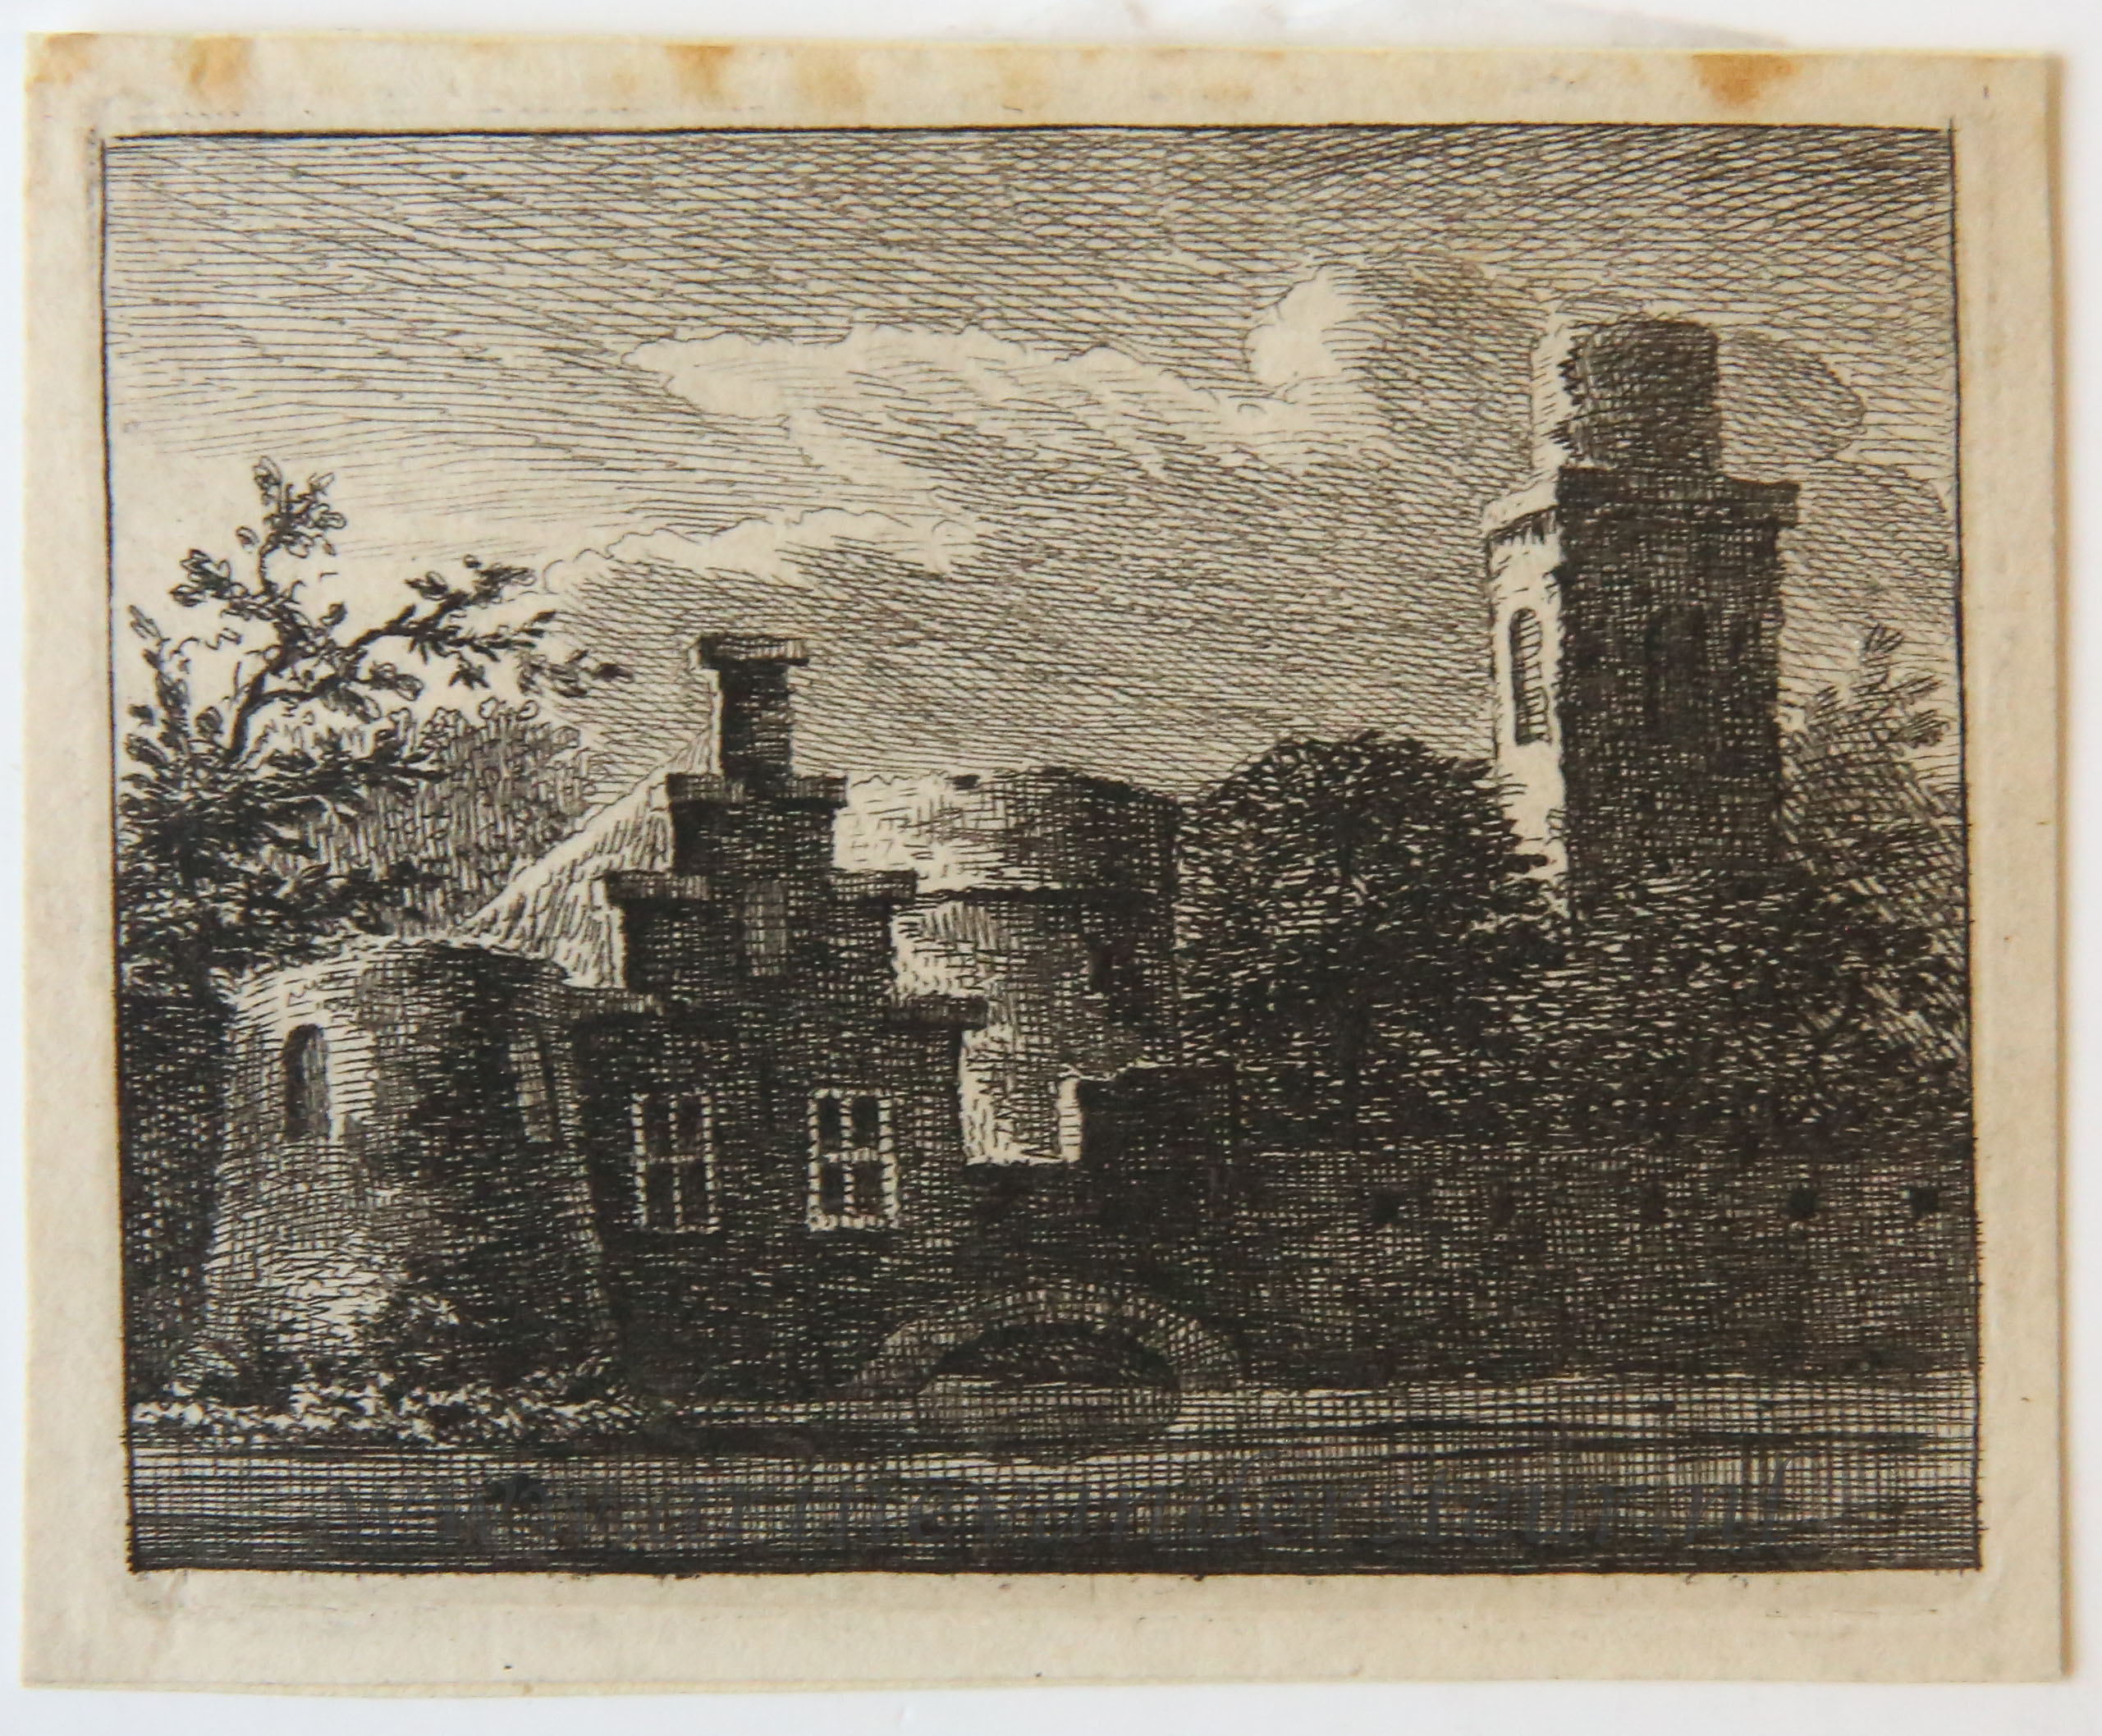 [Antique print, etching] Small view on houses, published 1766.